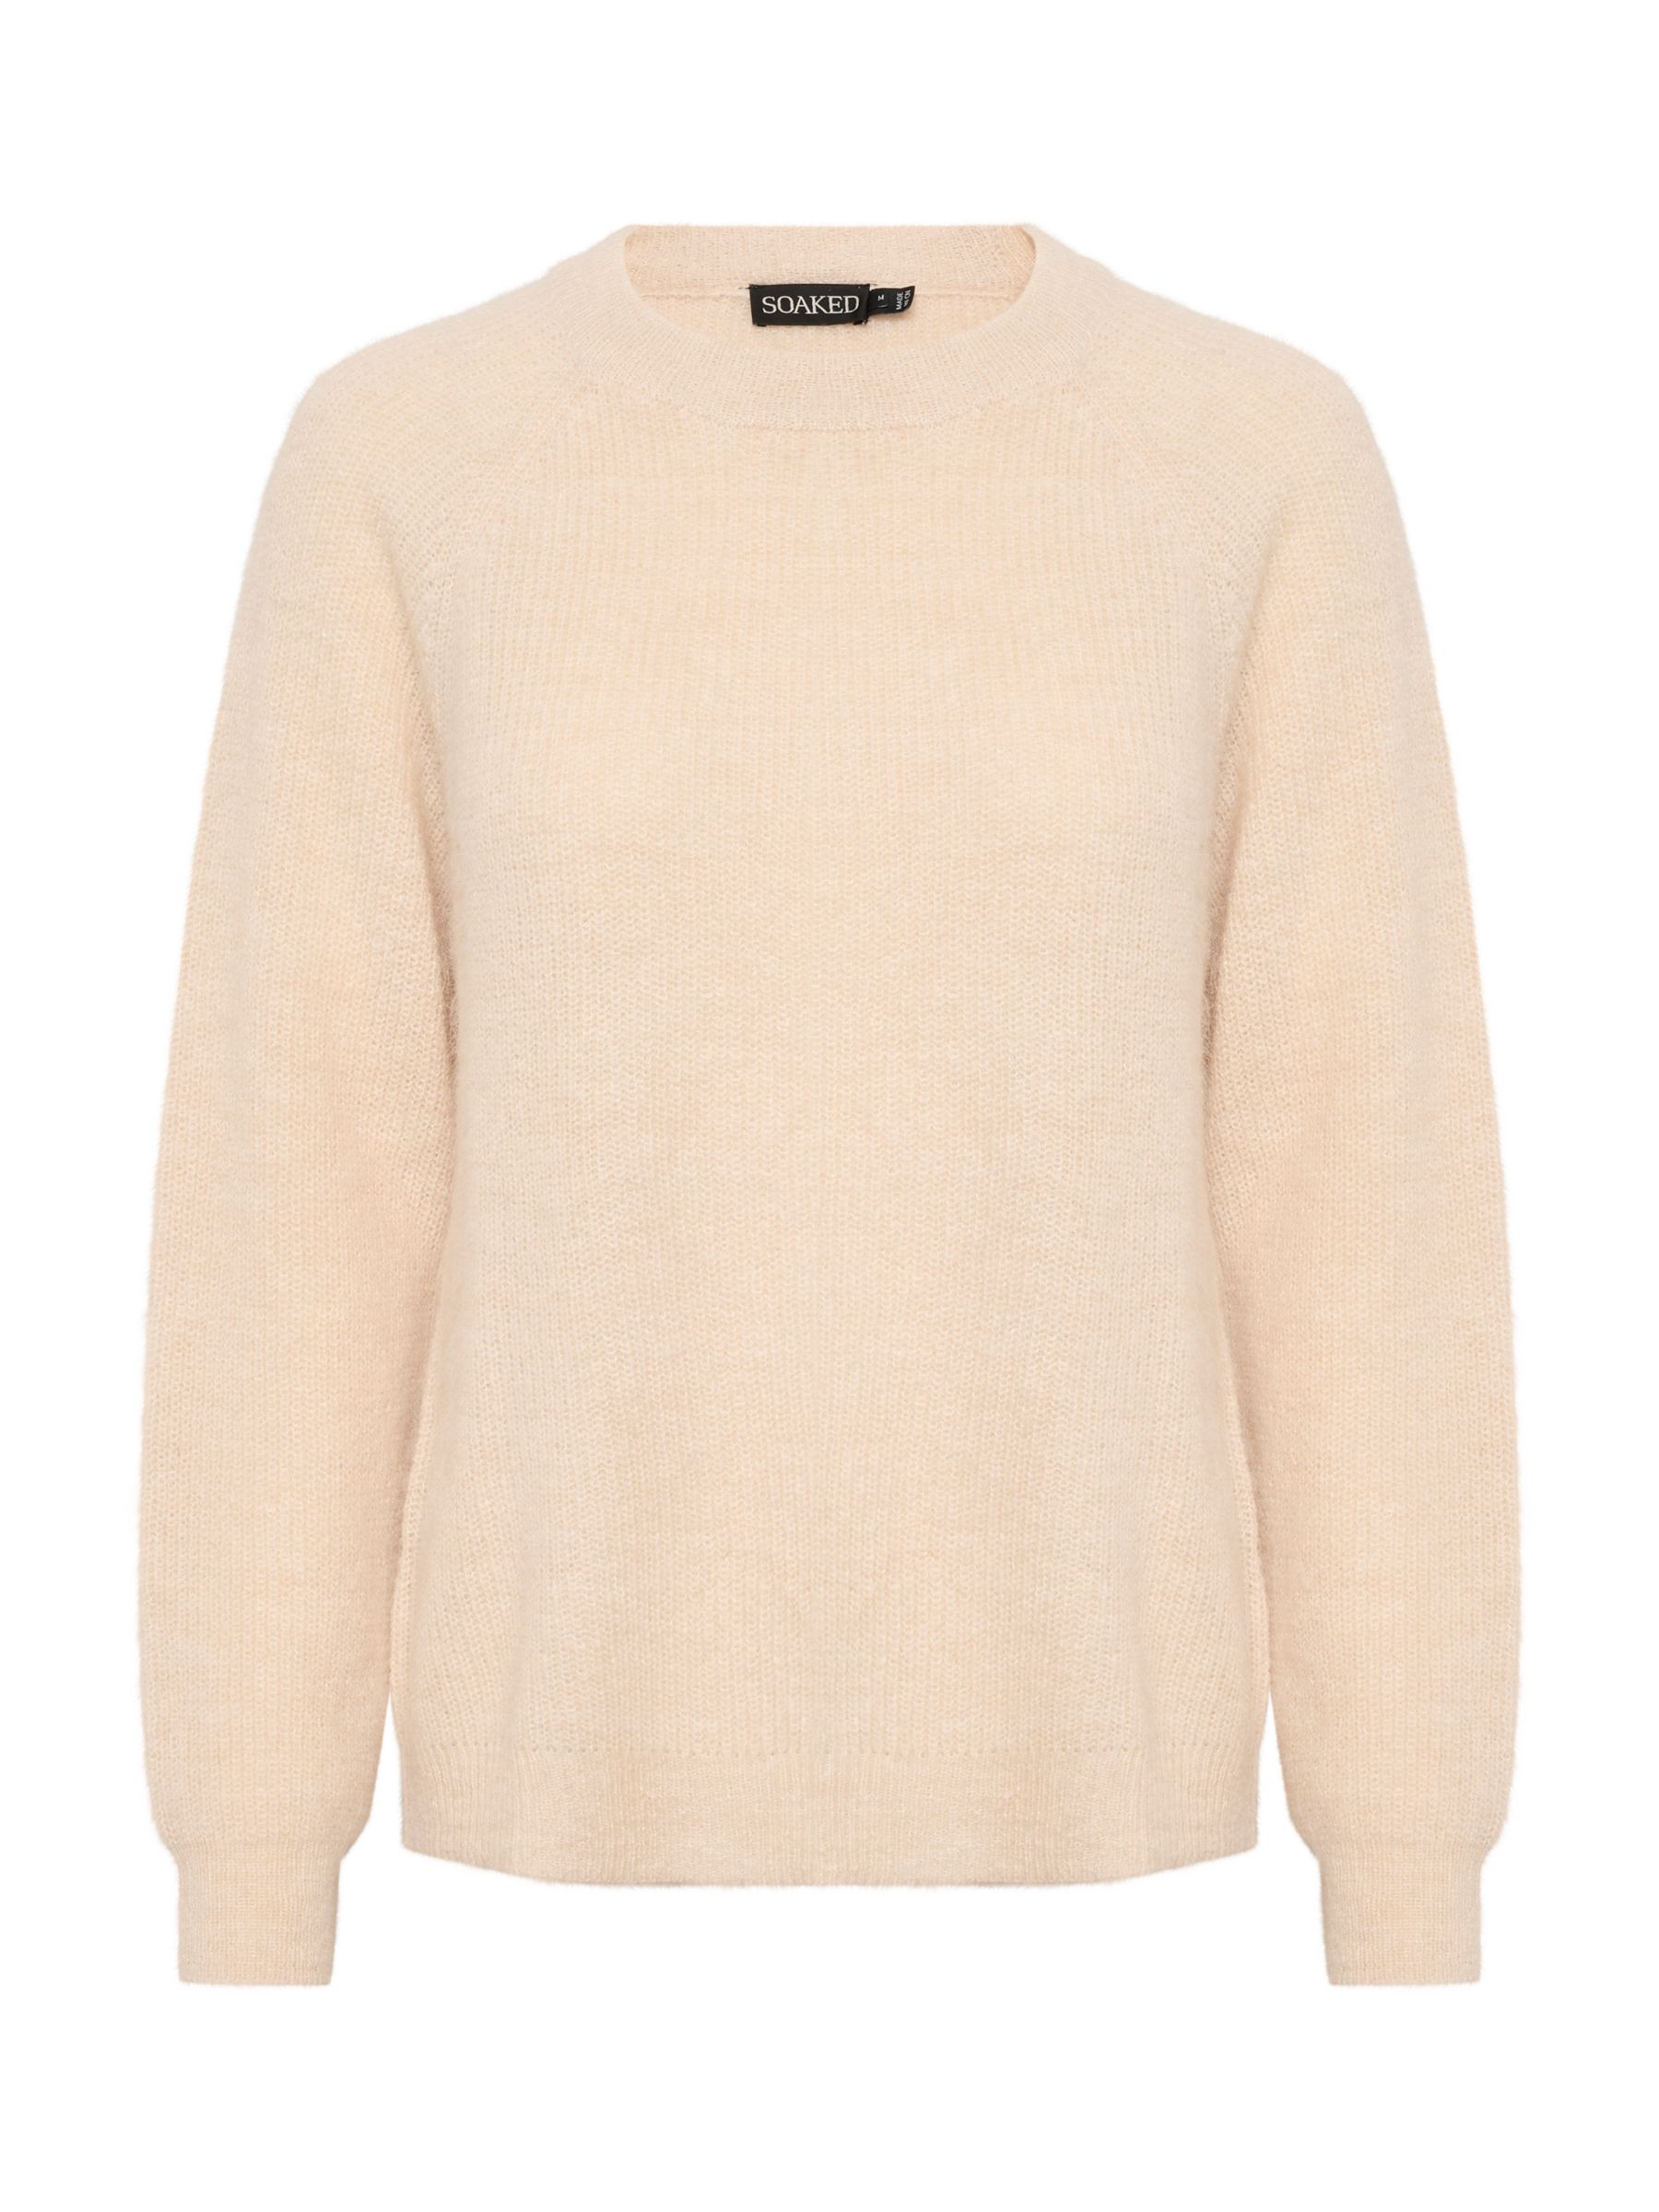 Soaked In Luxury Tuesday Crew Neck Jumper, Sandshell at John Lewis ...